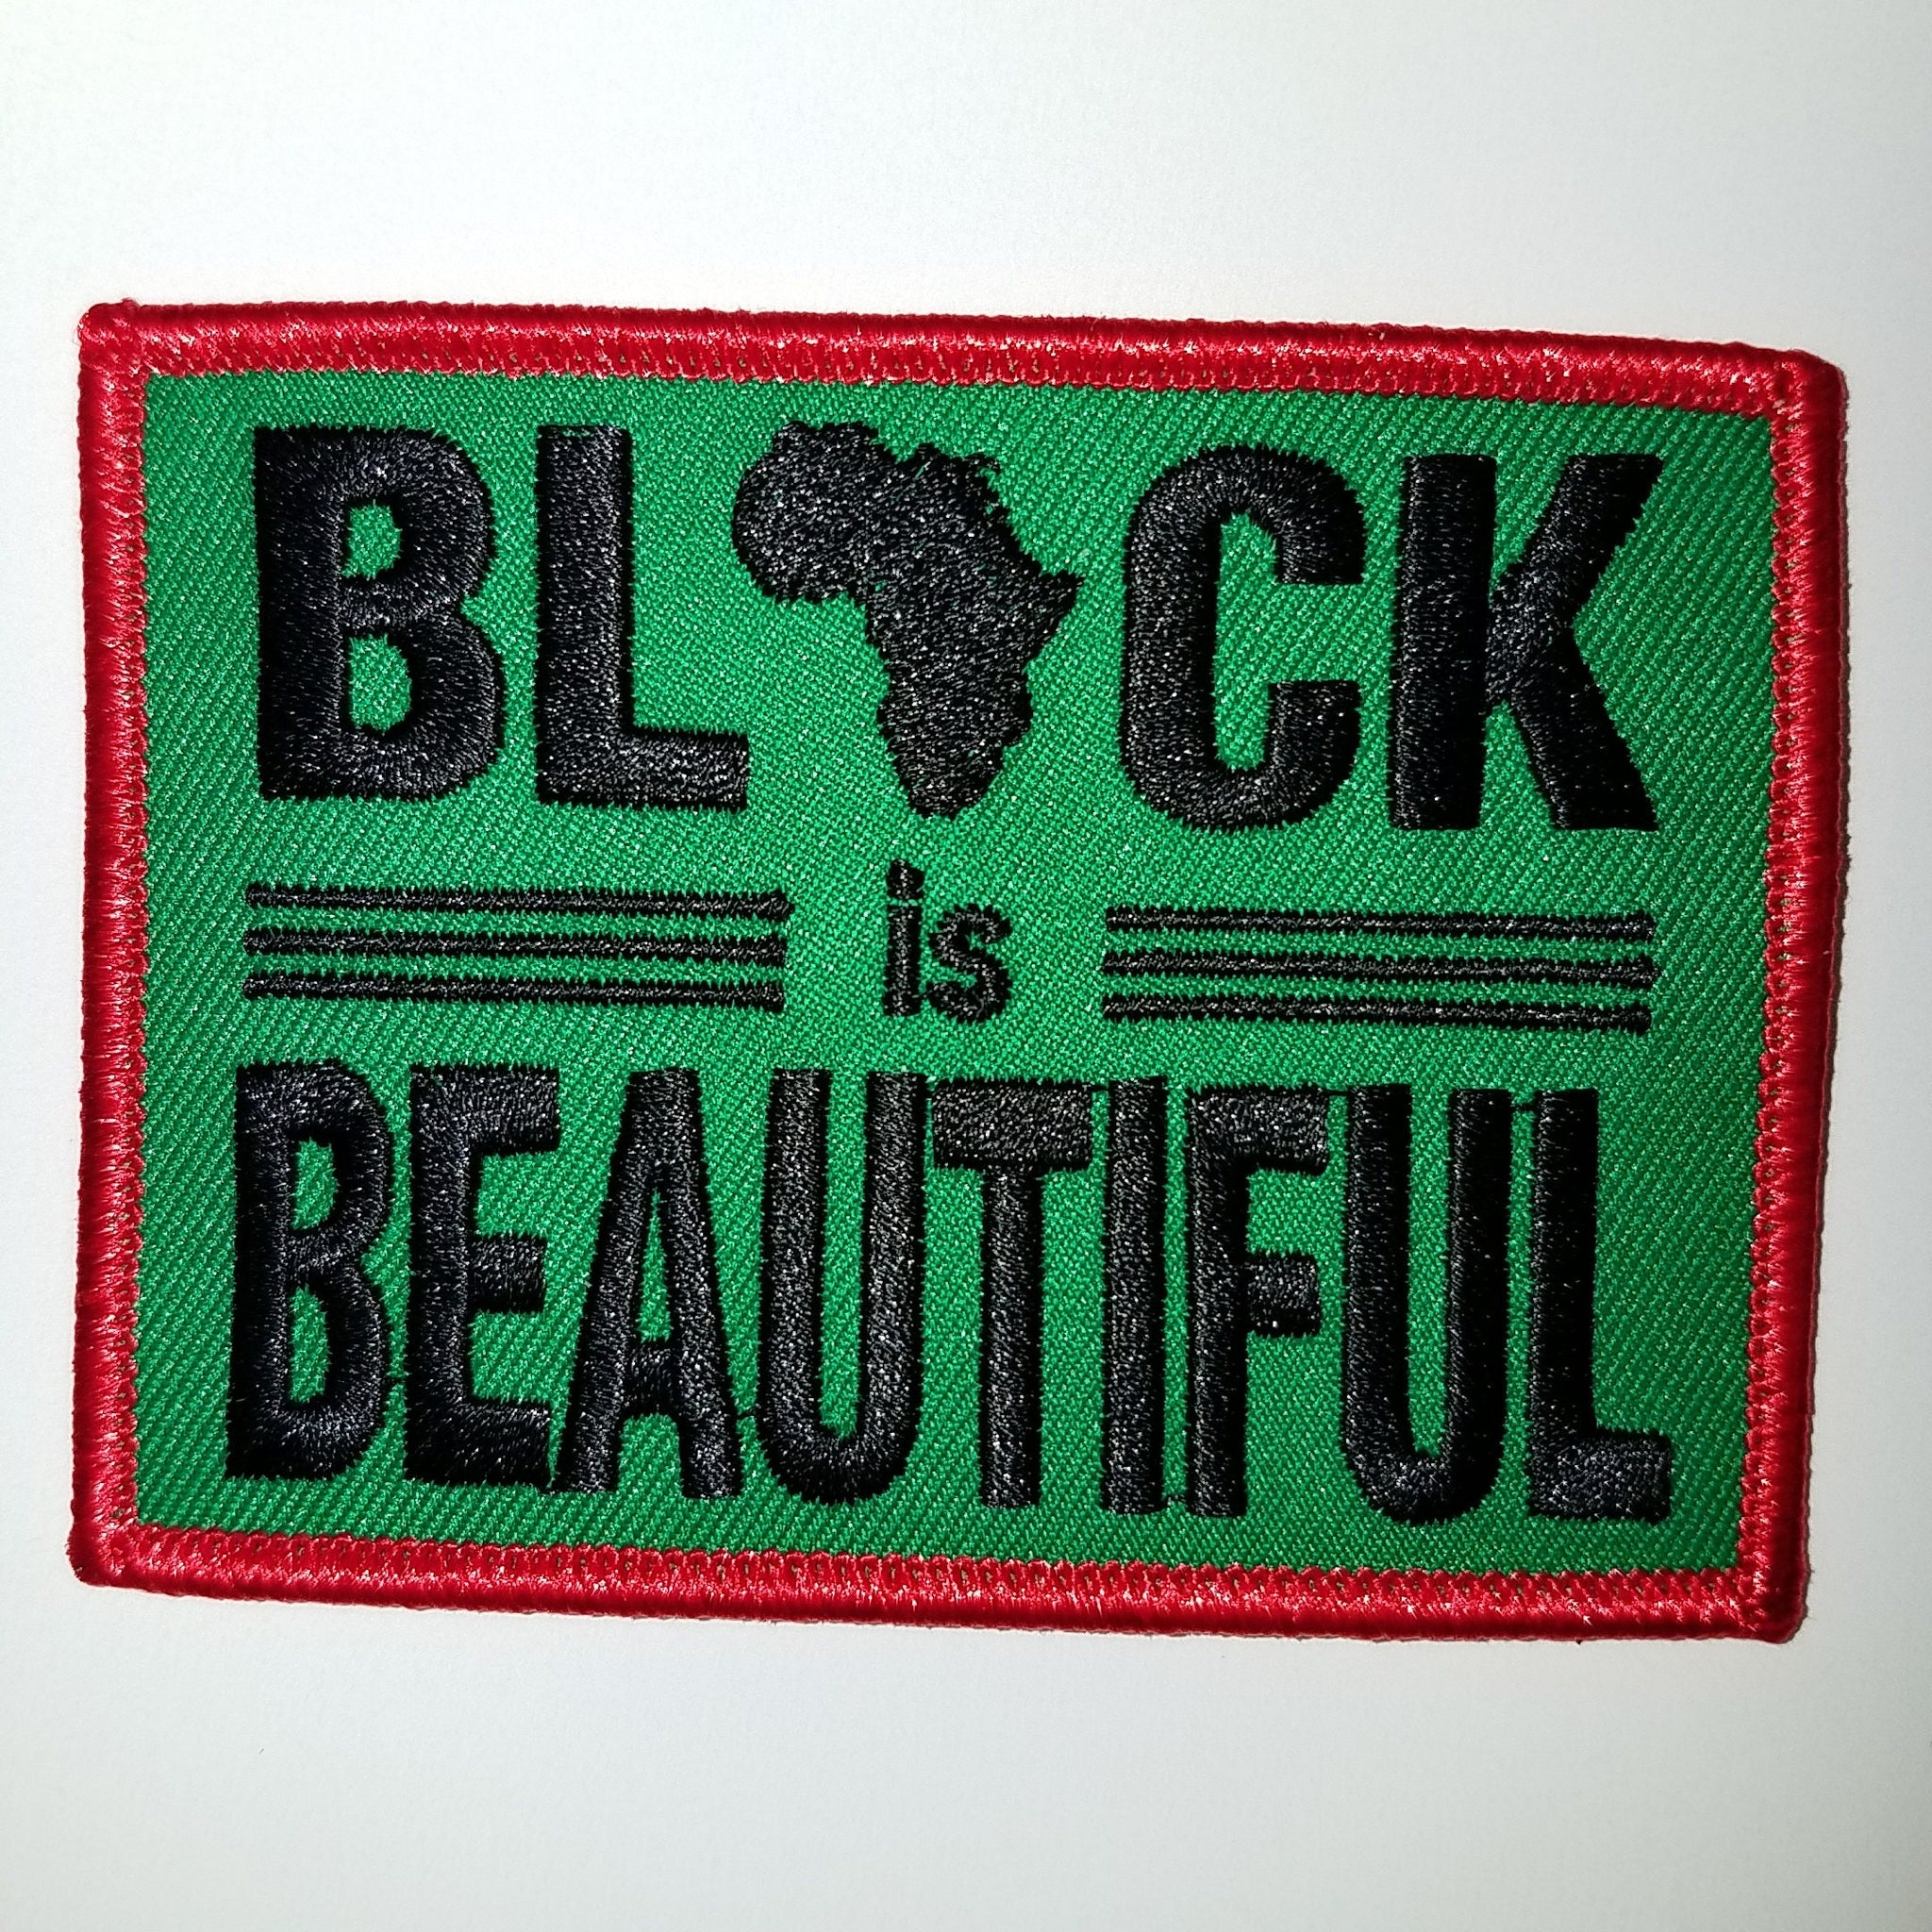 Fun, Collectable Patch "Black is Beautiful" Iron-On Embroidered Afrocentric Patch; Motivational Patch, Denim Patch